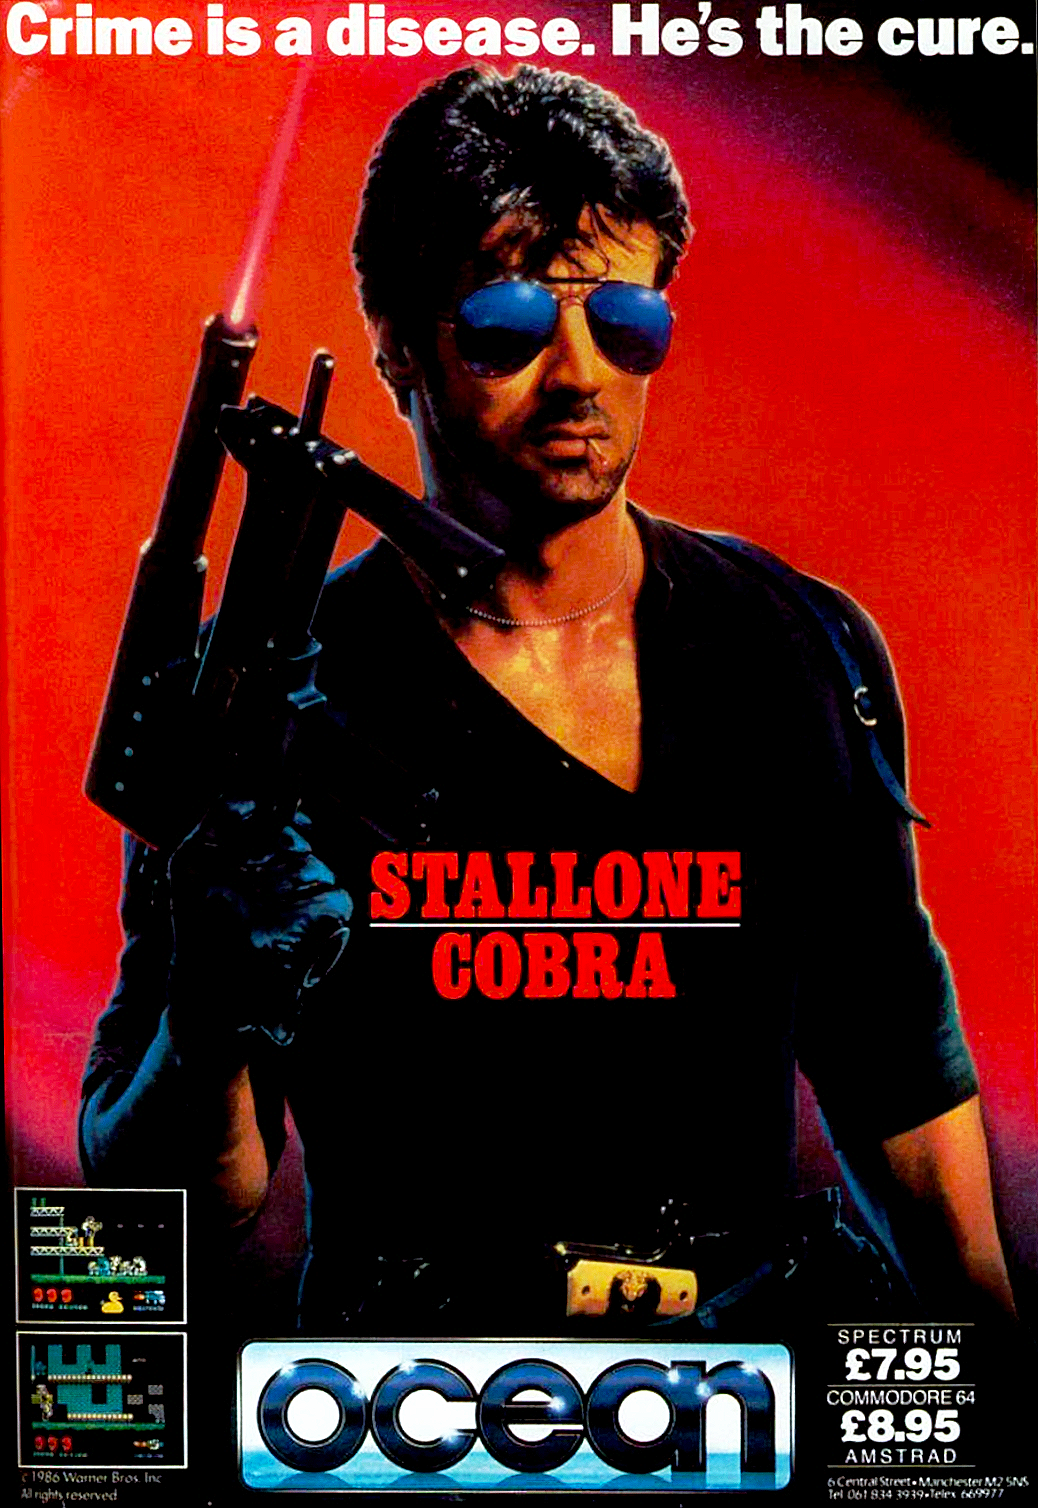 Image For Post | mstrad
Ocean Software released three different games based on the Sylvester Stallone action vehicle Cobra. The CPC version unleashes macho cop Marion 'Cobra' Cobretti onto the streets to protect fashion model Ingrid from the psychotic Night Slasher and his army of goons in eight side-scrolling levels.

All eight stages actually take place on the same (very long) game map; only the starting location differs. In each level, the goal is to meet a kill quota: a certain number of enemies must be taken out to advance automatically to the next stage. Enemies come running along the street, hide in trash cans or shoot from windows, armed with throwing knives, machine guns or rocket launchers. Also present: dive-bombing ducks(!). Cobra can take a few hits before he loses a life; an extra one is awarded every 10.000 points.

At the start, Cobra is unarmed and must punch out the bad guys, but some enemies leave behind hamburgers that when picked up give one of three weapon power-ups: a machine gun, a pistol or a throwing knife, each with only limited energy, which can be refilled by collecting another hamburger.

Starting in level three, Ingrid will appear and Cobra must follow and protect her. She can't be harmed though, at least until level six, when the Night Slasher appears. Failing to protect Ingrid means the loss of a life.

C64
Cobra on the C64 adapts the 1986 Sylvester Stallone movie like its counterparts on other 8-bit systems. It is similar to the Spectrum version, but features unique level designs and gameplay mechanics.

The player controls ultra-tough cop Cobra who must make his way through three side-scrolling levels: the cityscape, a rural area and a factory. Hordes of goons will try to kill him where he stands and attack with throwing knives, axes, grenades and guns. At the beginning, Cobra is unarmed and can only evade or punch out his enemies, but he can pick up weapon icons to increase his damage potential. Available are knives, grenades, a pistol and a machine gun (guns and ammo have to be collected separately). Ammunition for all weapons is limited. Cobra can refill his health by picking up hamburgers.

Not all that moves has to be killed: sometimes, innocent civilians cross Cobra's path. Shooting them will cost him a life. In levels one and three, Cobra also has to find fashion model Ingrid, then lead her along to the level exit.

Spectrum
This Green Beret-style arcade game follows the plot of the film starring Sylvester Stallone. As Stallone's Cobra character you must rescue Ingrid Knutsen before the Night Slasher gets to her. There are 3 levels of gameplay, set in a city, the countryside and a factory. All have multiple ledges and platforms to negotiate.

Cobra starts without a weapon, but he is tough enough to attack with a precisely timed head-butt, although this method of killing is risky, as it will kill Cobra if mistimed. Fortunately there are weapons to pick up along the way, by picking up hamburgers. The weapons include daggers, pistols and machine guns, but all are time-limited